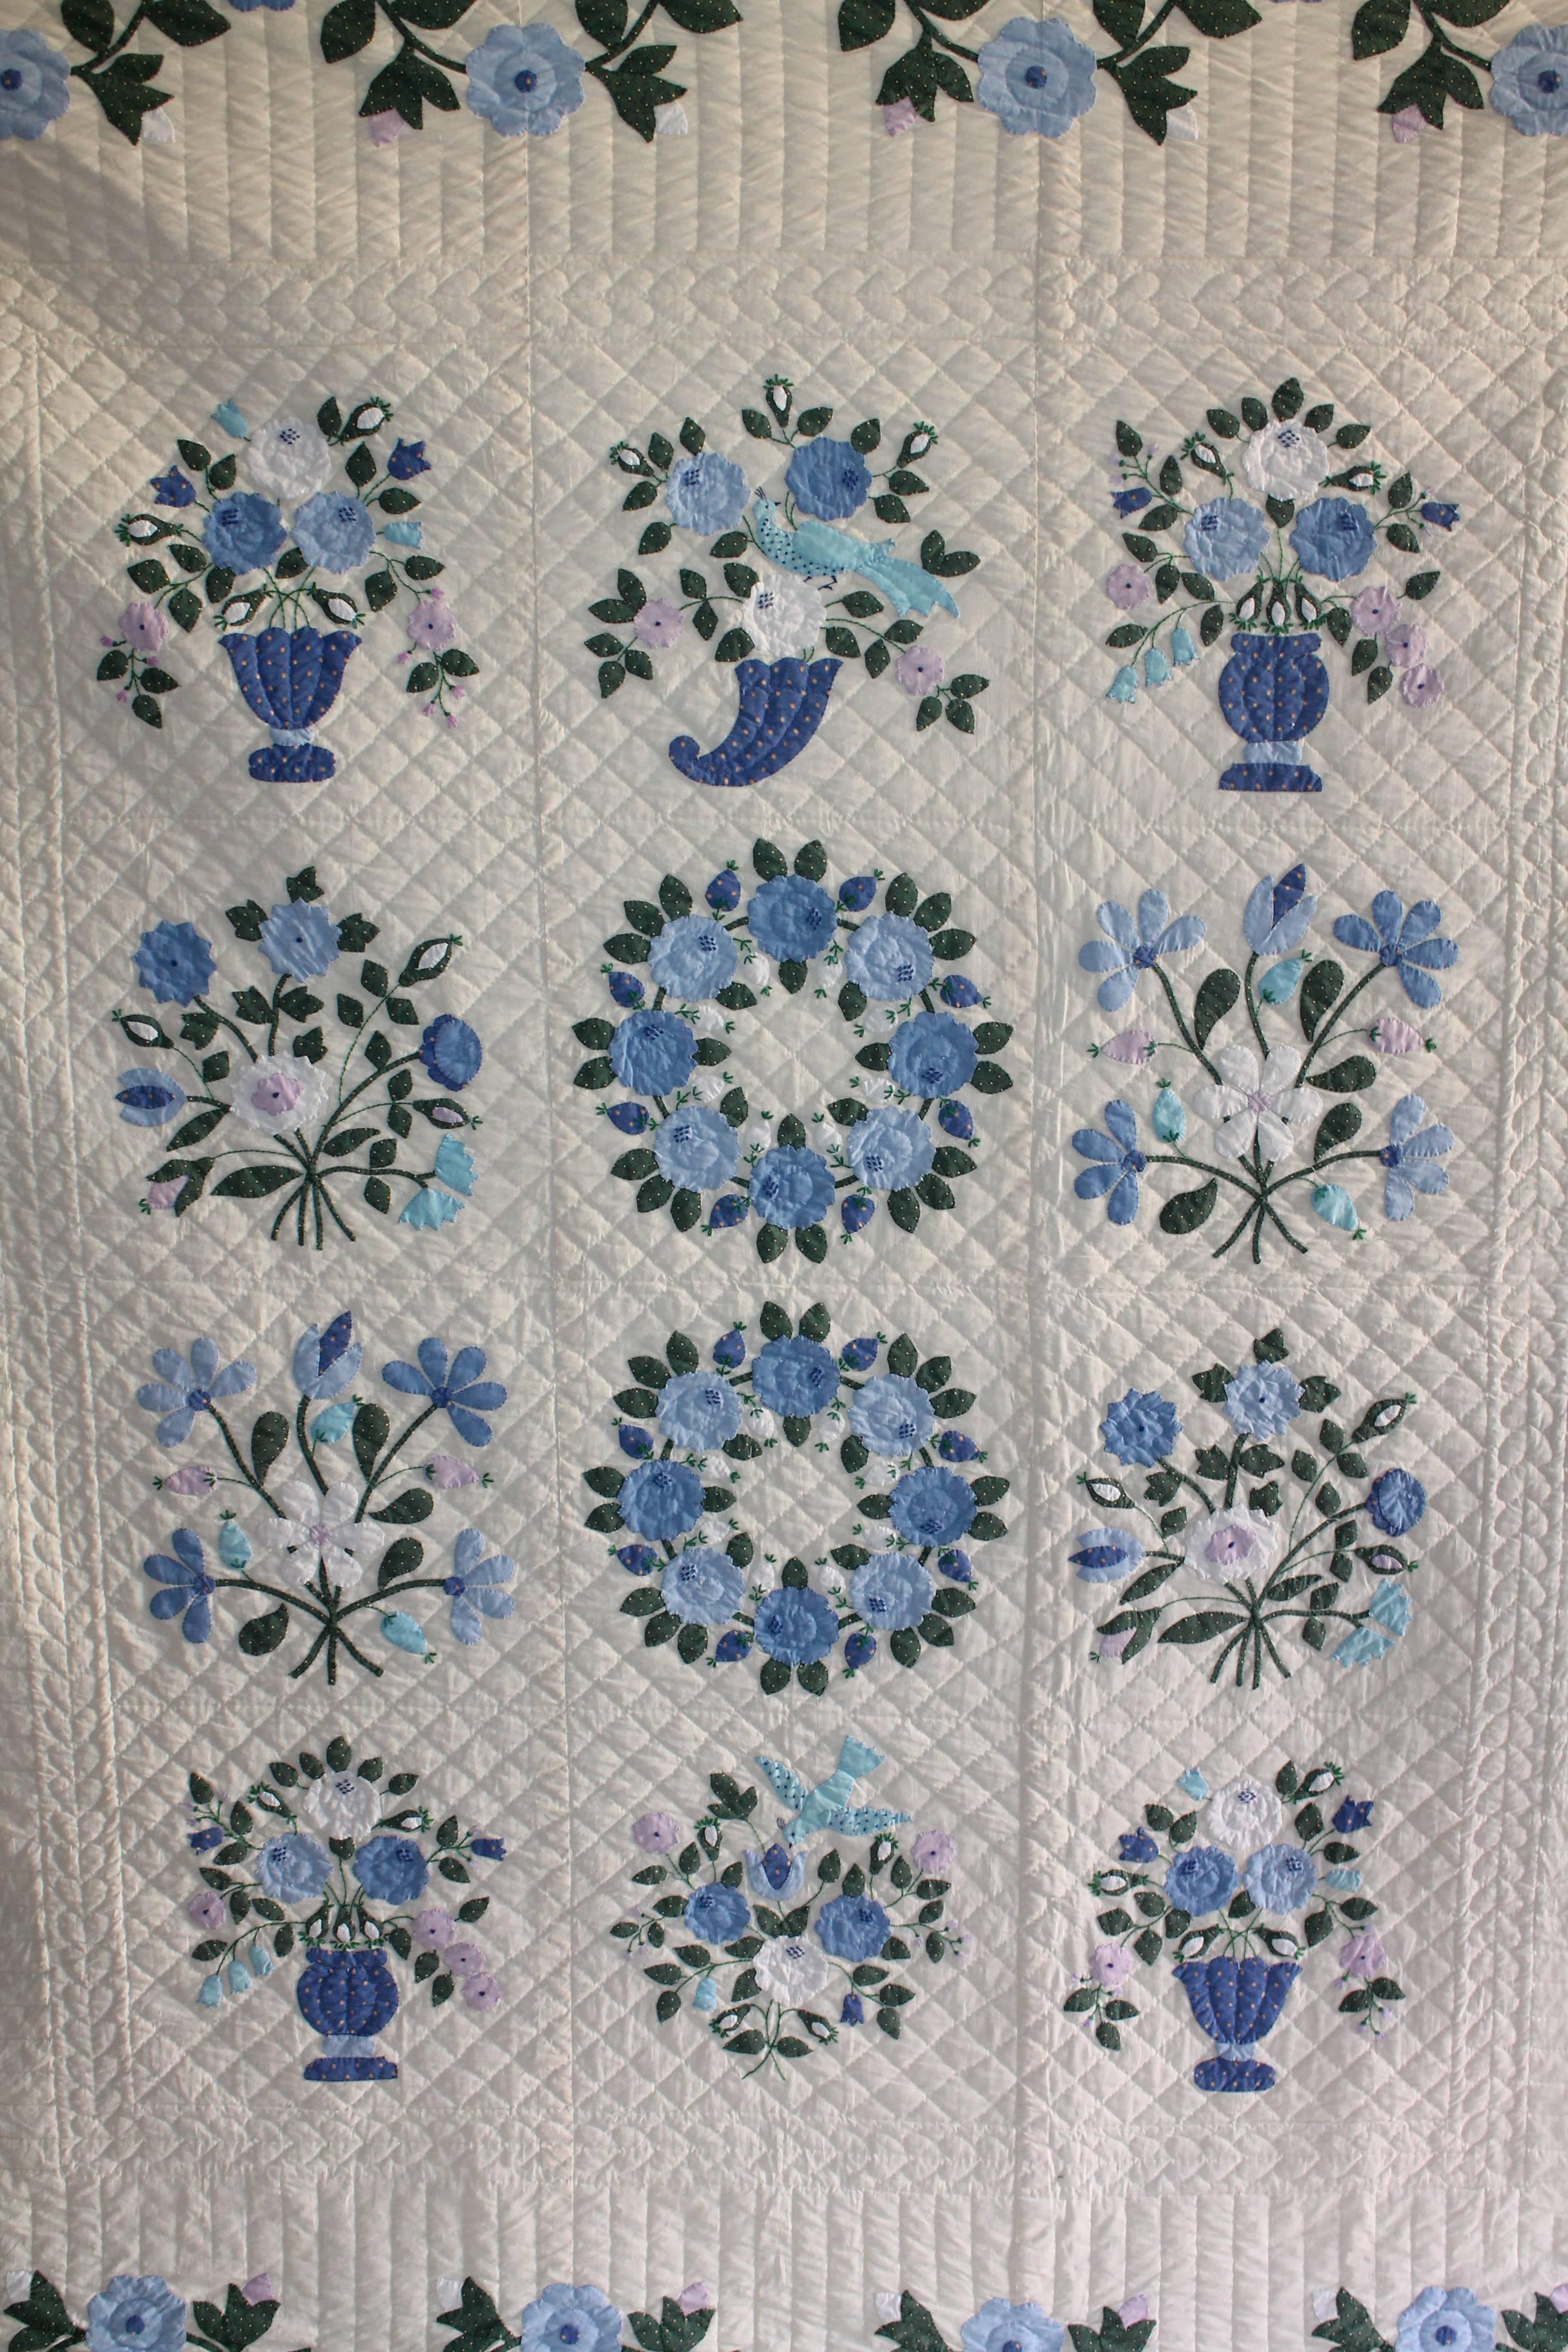 This fine example of great workmanship is in good condition with fine detail quilting and applique work. The quilt is comprised of just blue and white with hints of green. The stitching of the quilting and applique work is the very best.